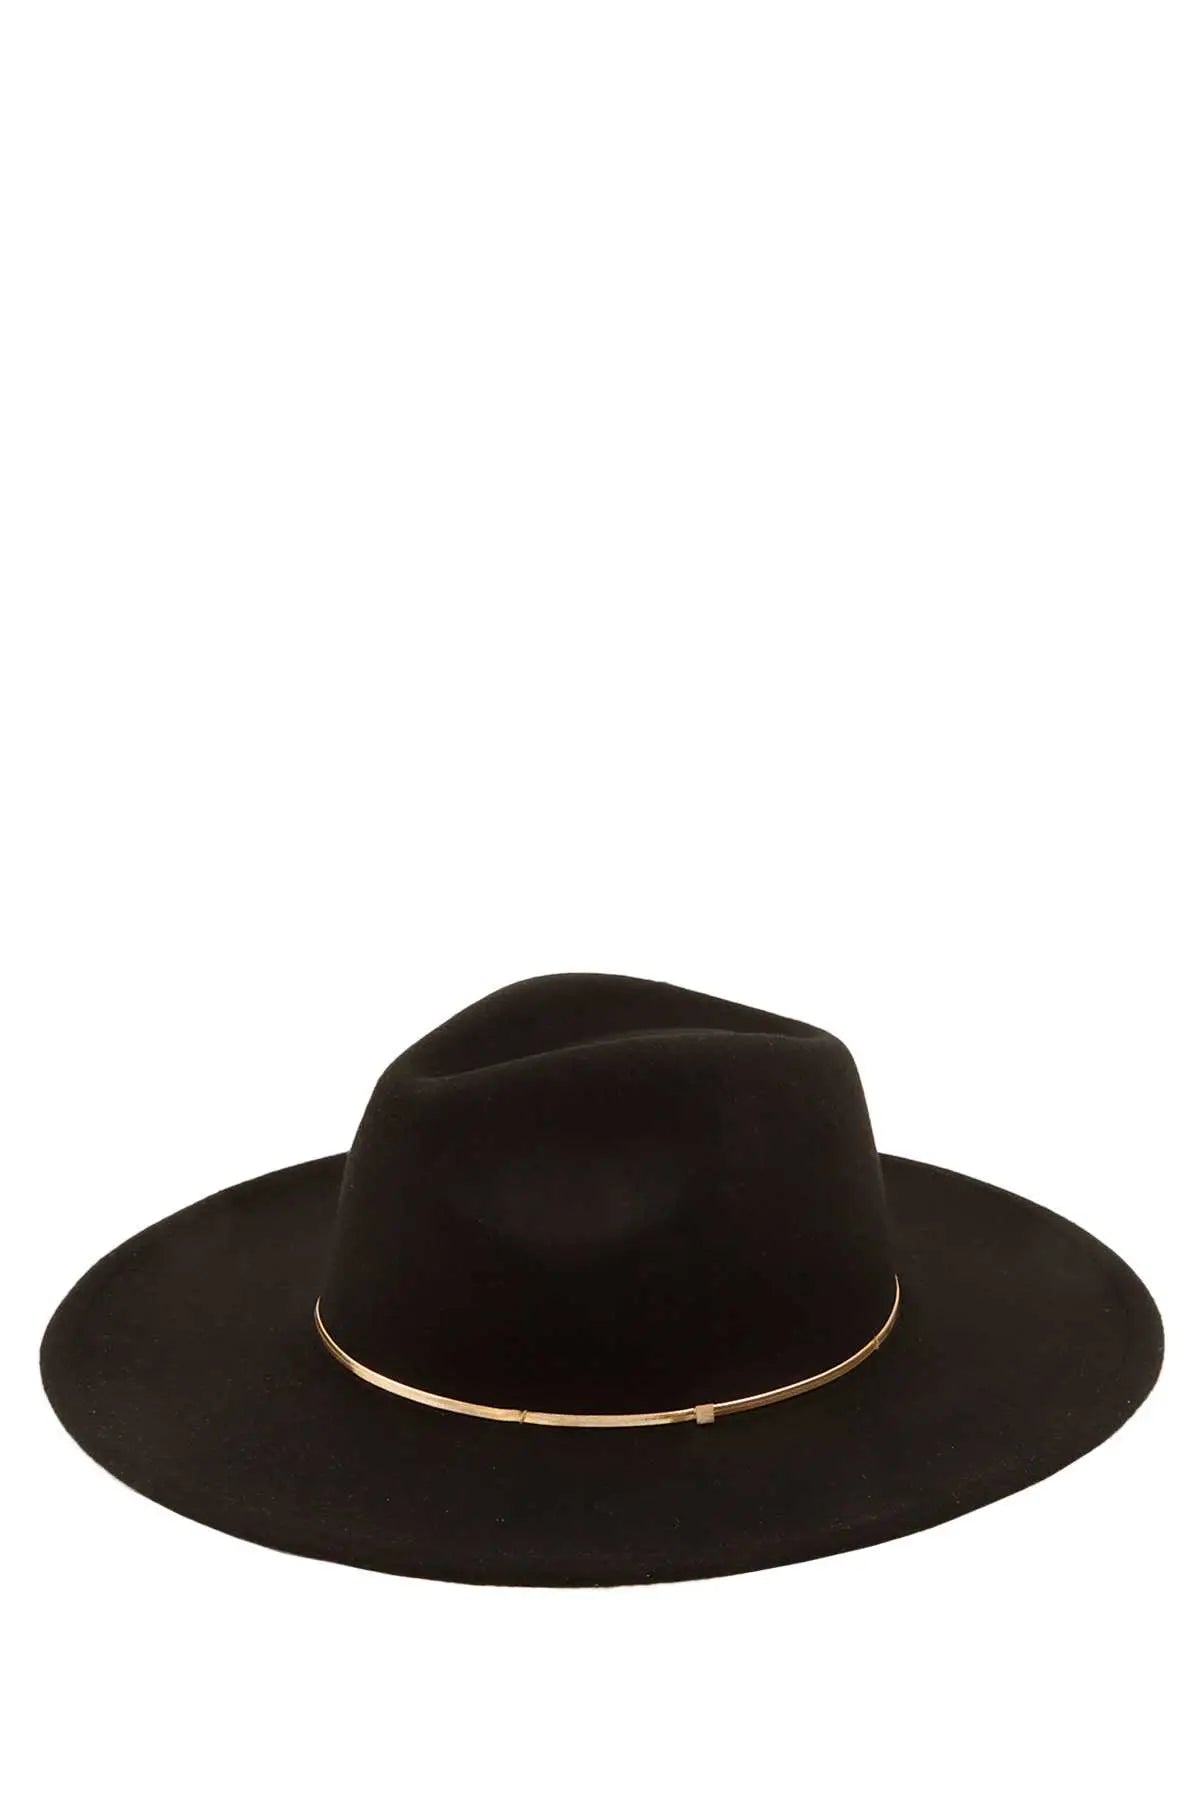 Snake Chain Accent Fedora Hat